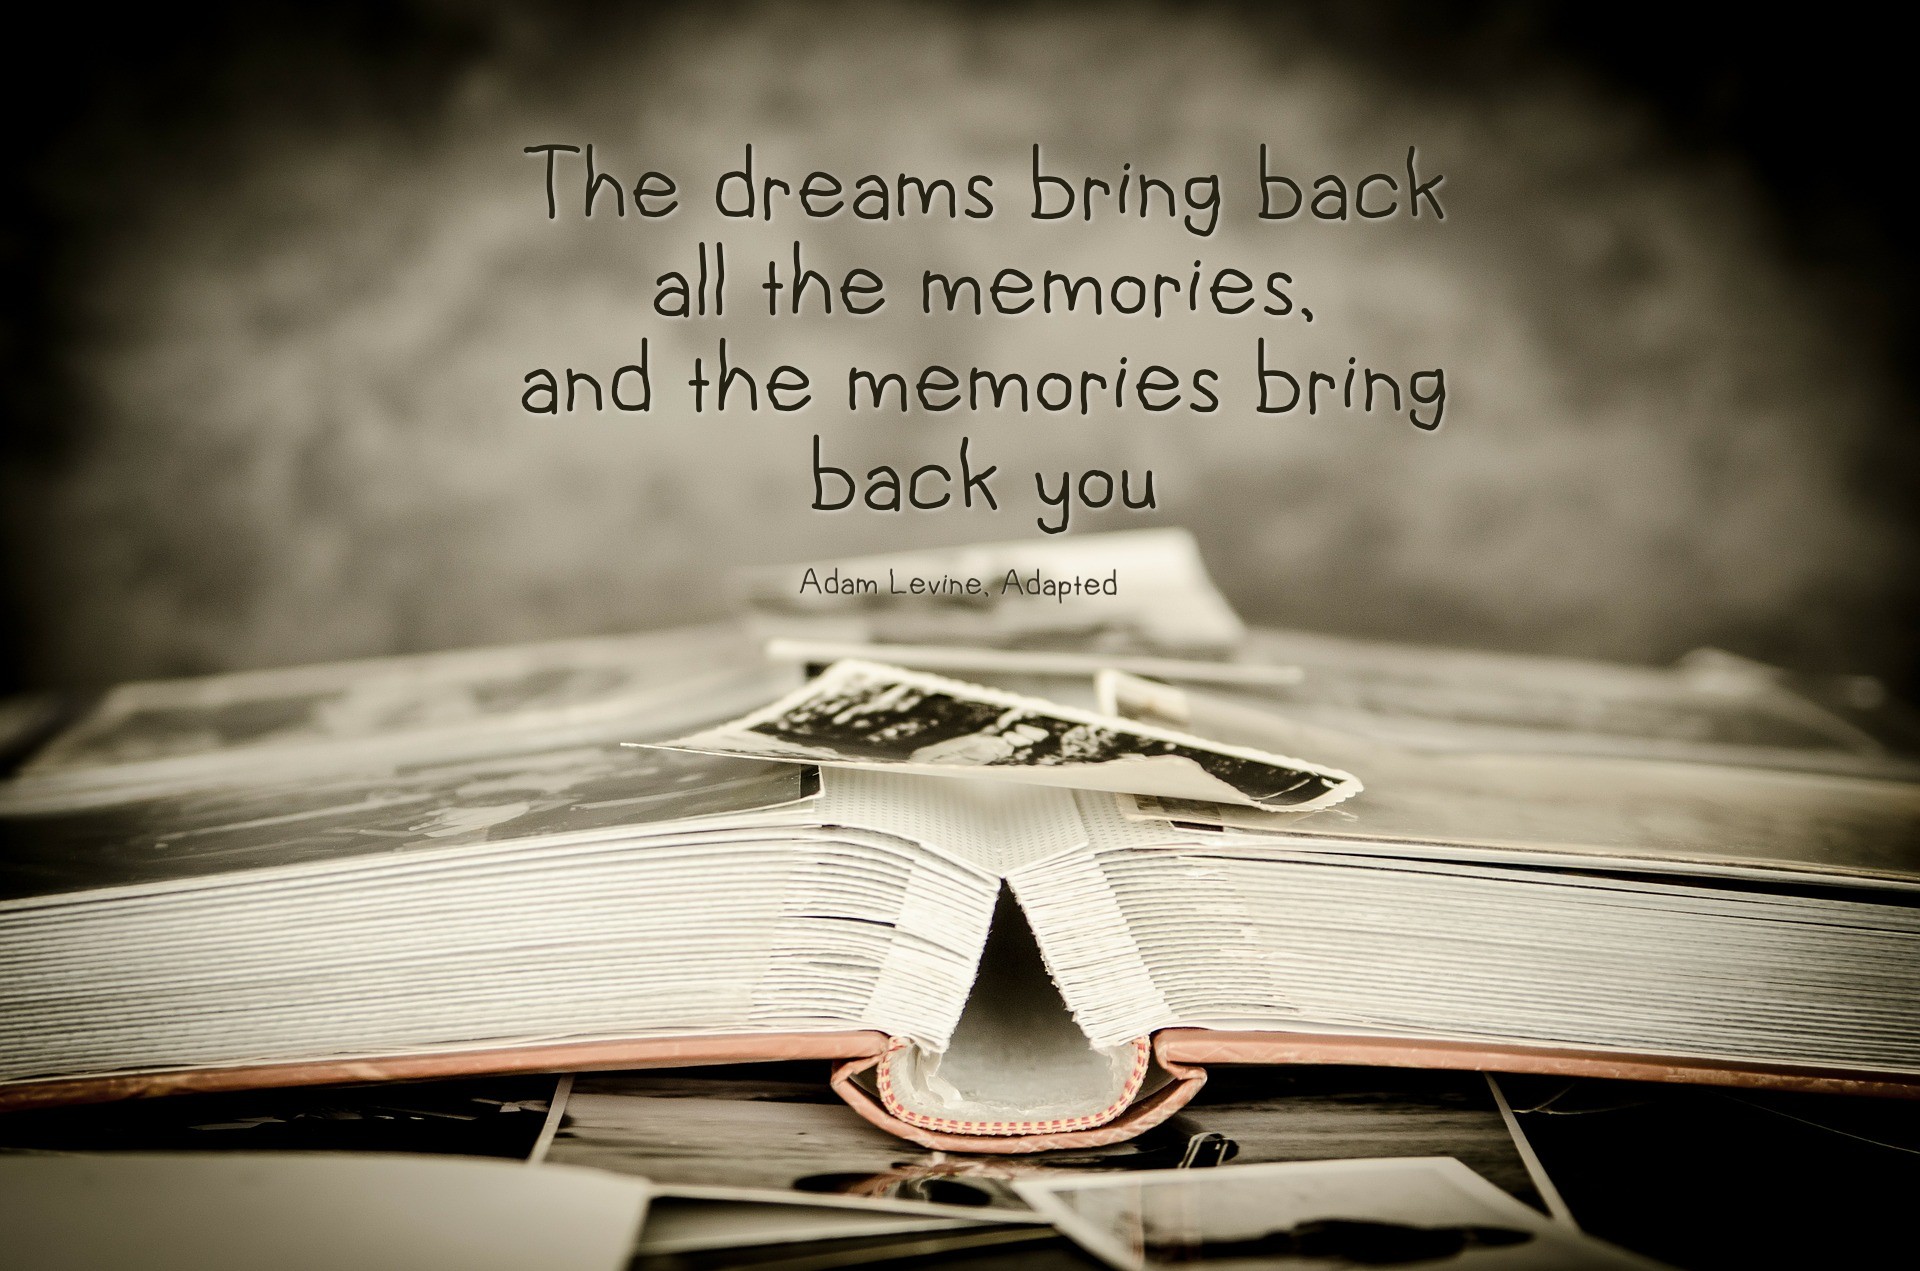 The dreams bring back all the memories, and the memories bring back you